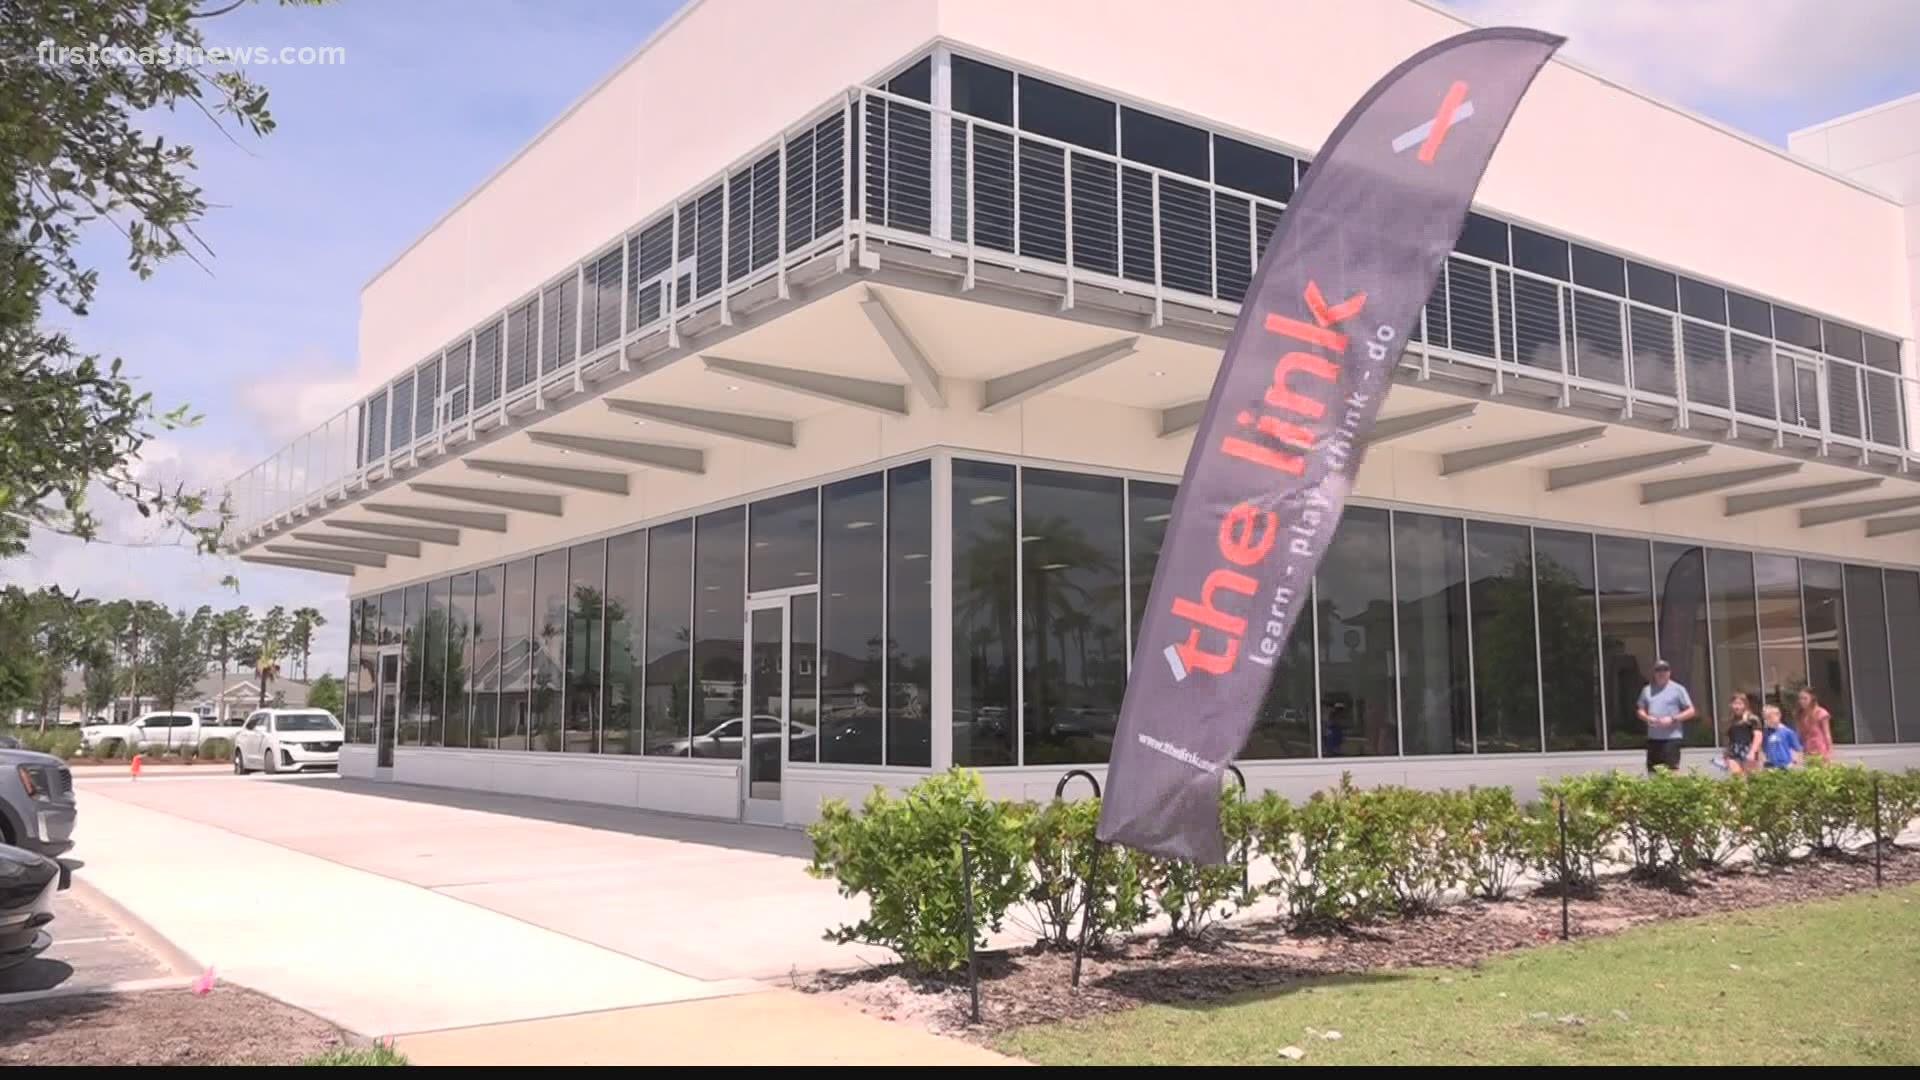 Northern St. Johns County is now home to an innovative hub where you can work and play. The Link opened this month in the heart of Nocatee.